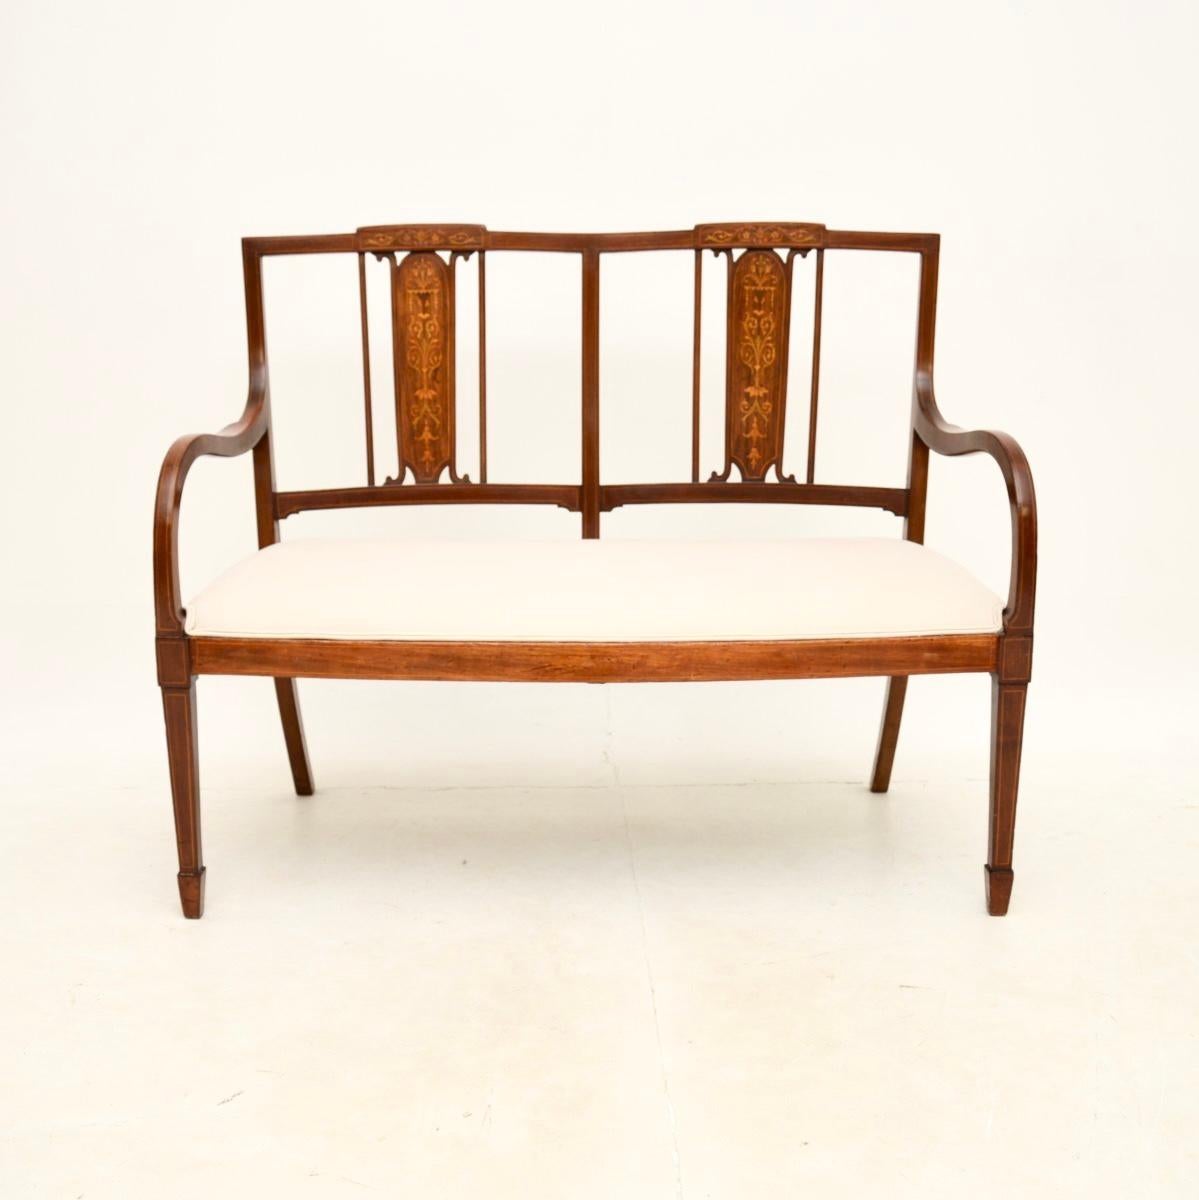 A stunning antique Edwardian settee. This was made in England, it dates from around the 1900-1910 period.

The quality is outstanding, this is beautifully made and has a lovely design. The frame is elegant yet sturdy, the pierced back has gorgeous